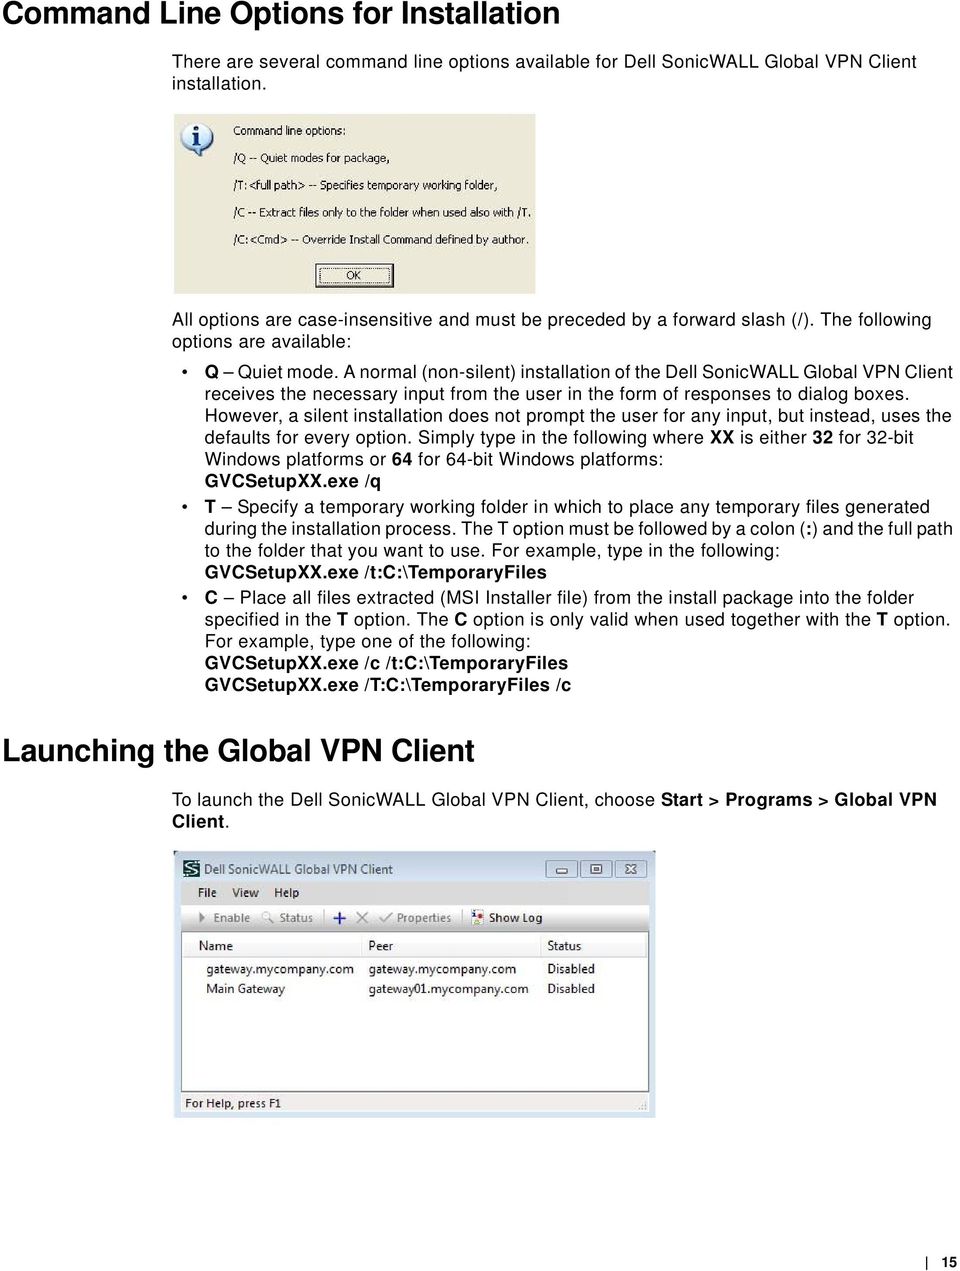 A normal (non-silent) installation of the Dell SonicWALL Global VPN Client receives the necessary input from the user in the form of responses to dialog boxes.